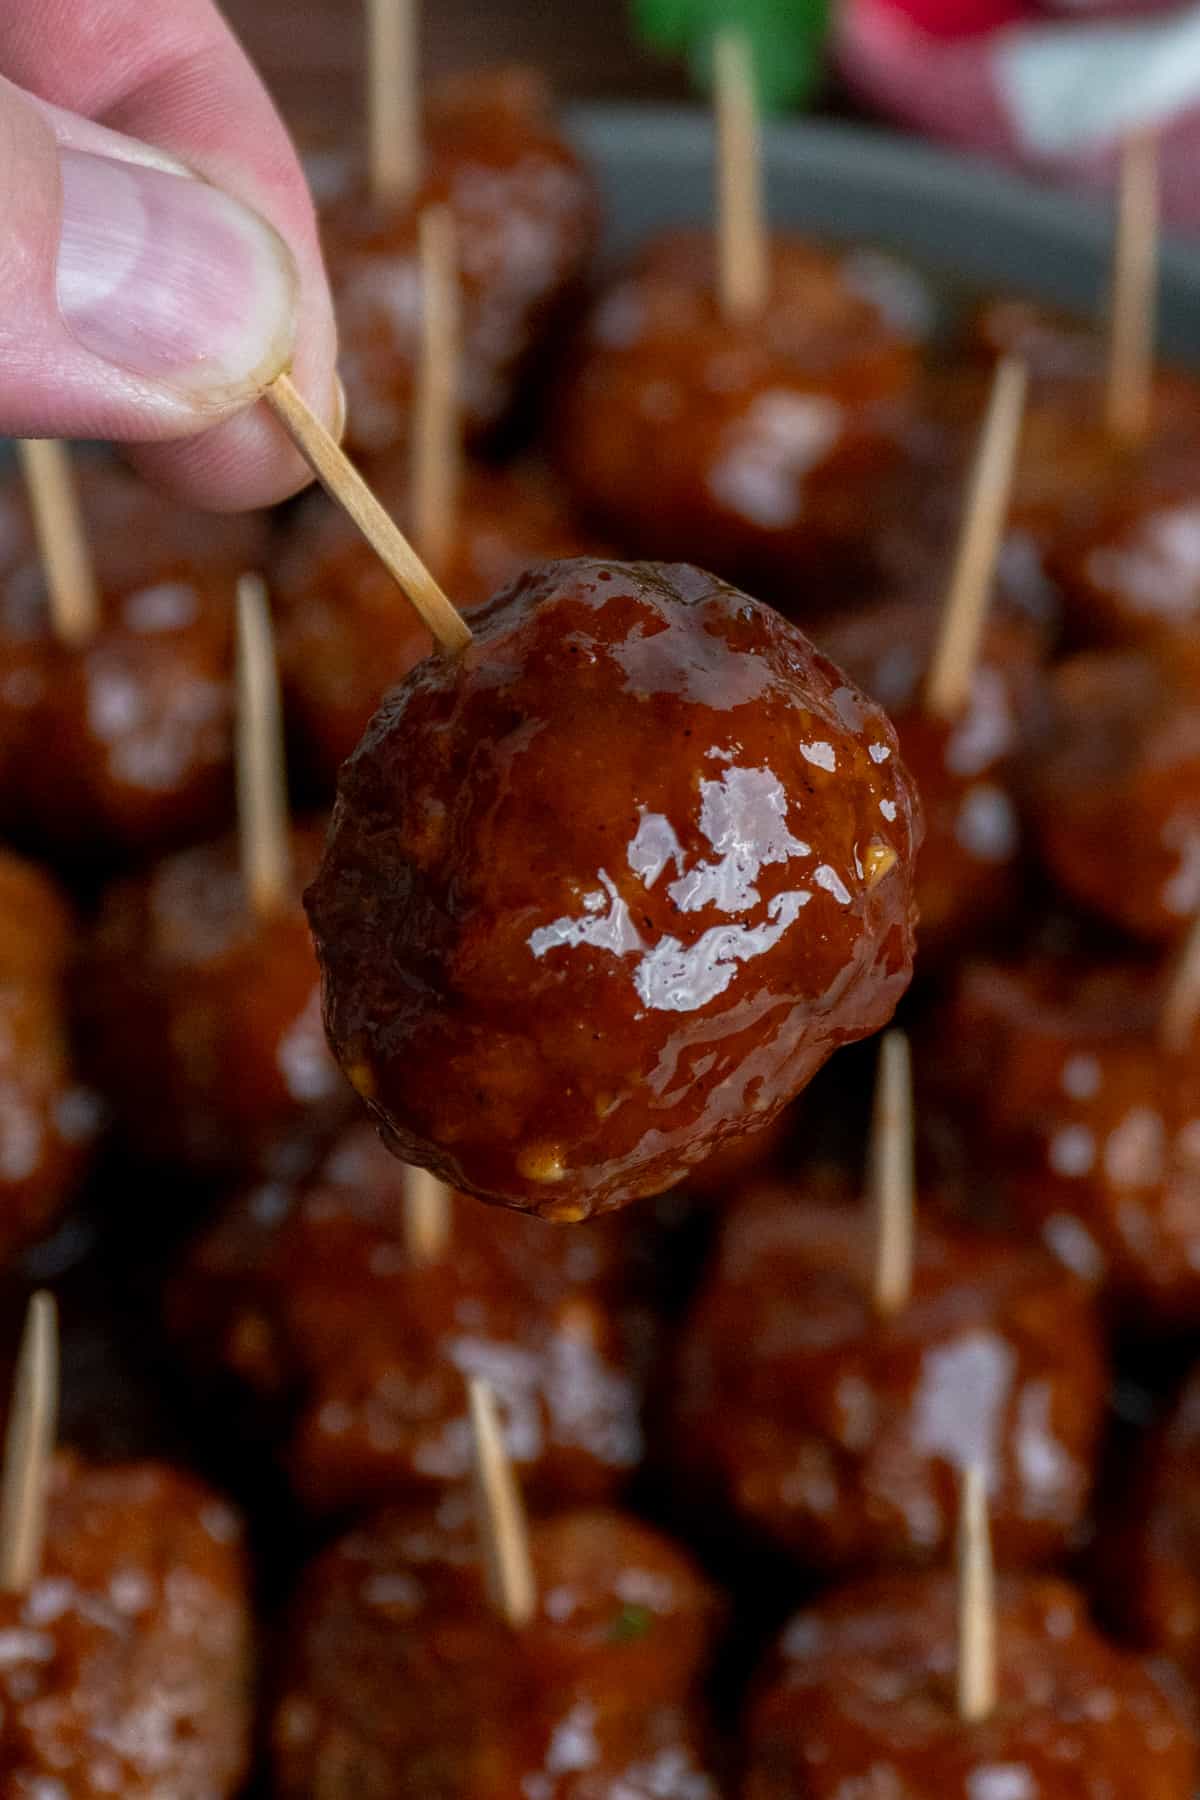 A hand holding a BBQ meatball on a toothpick.